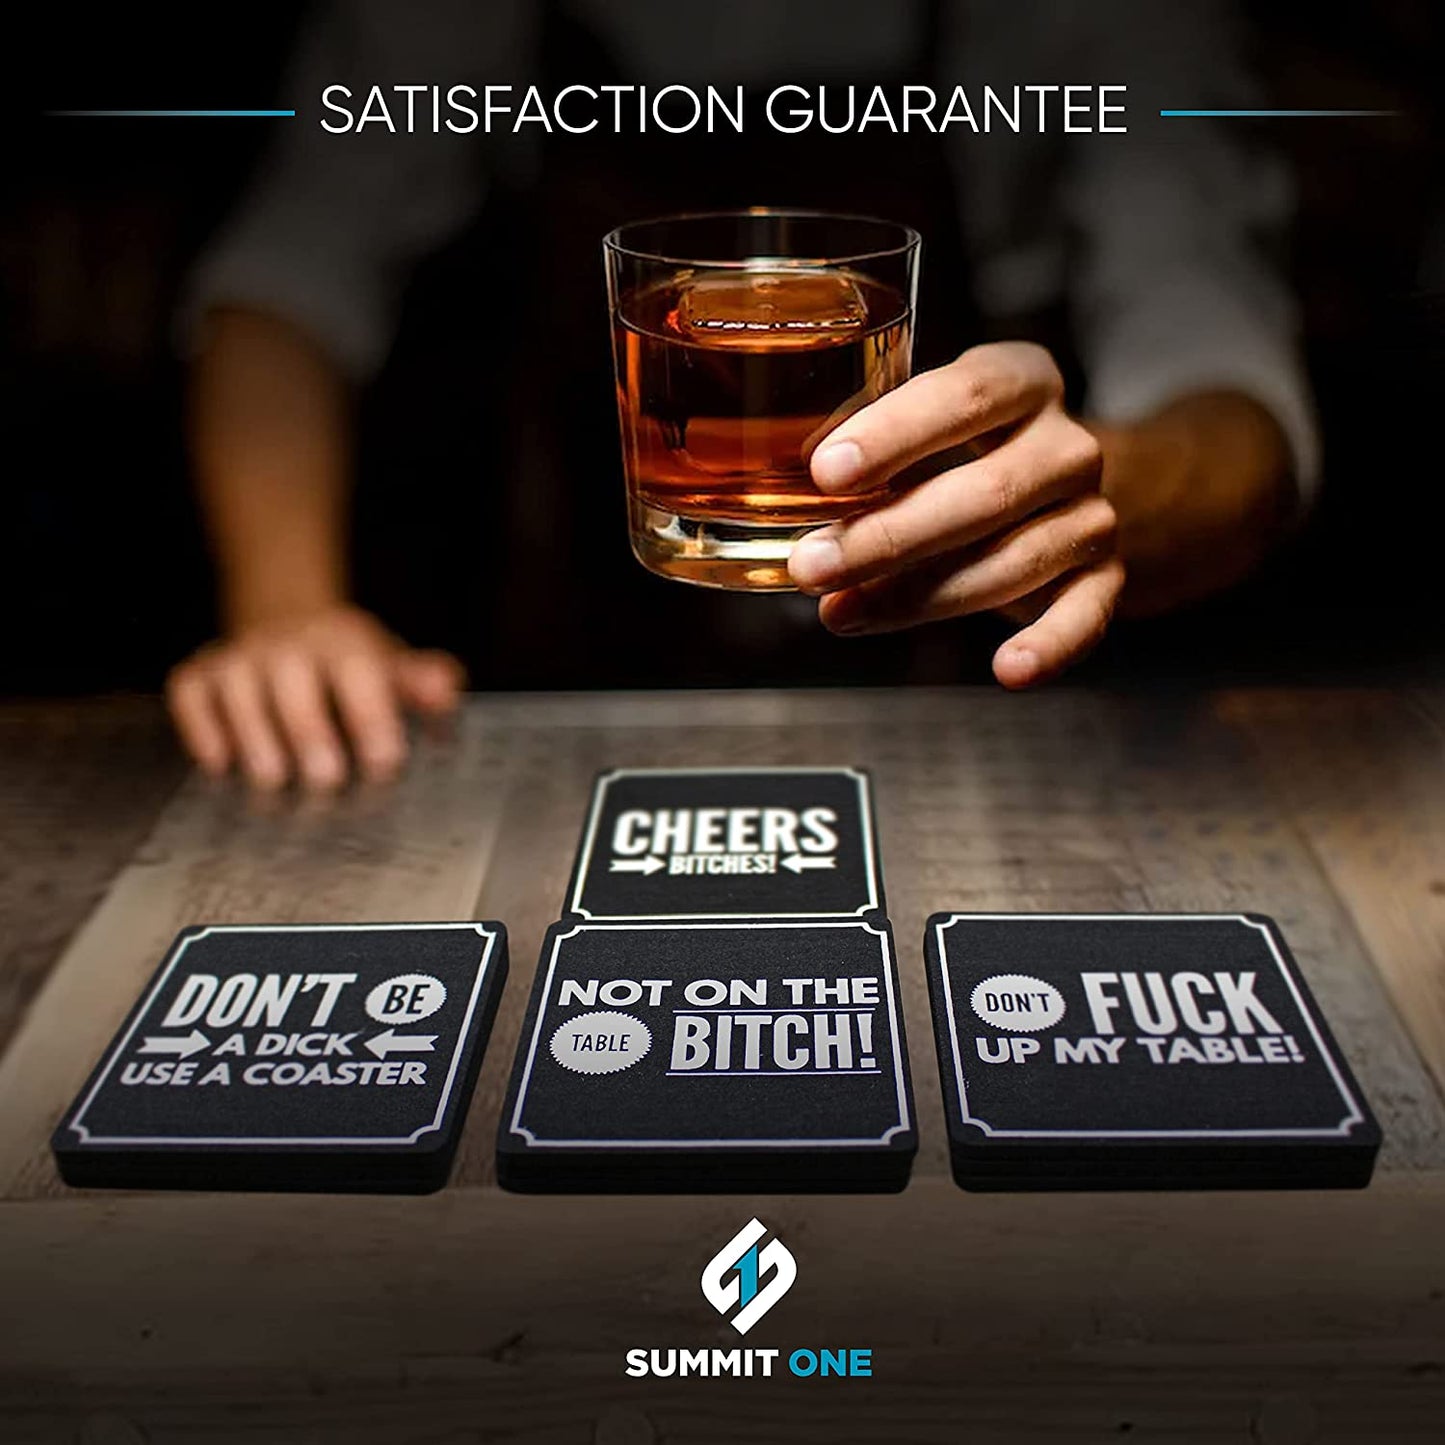 Funny Coasters for Drinks, Set of 10 (4 X 4 Inch, 5Mm Thick) - Bar Accessories for the Home Bar Set, Absorbent Felt Drink Coasters the Ideal Man Cave Accessories